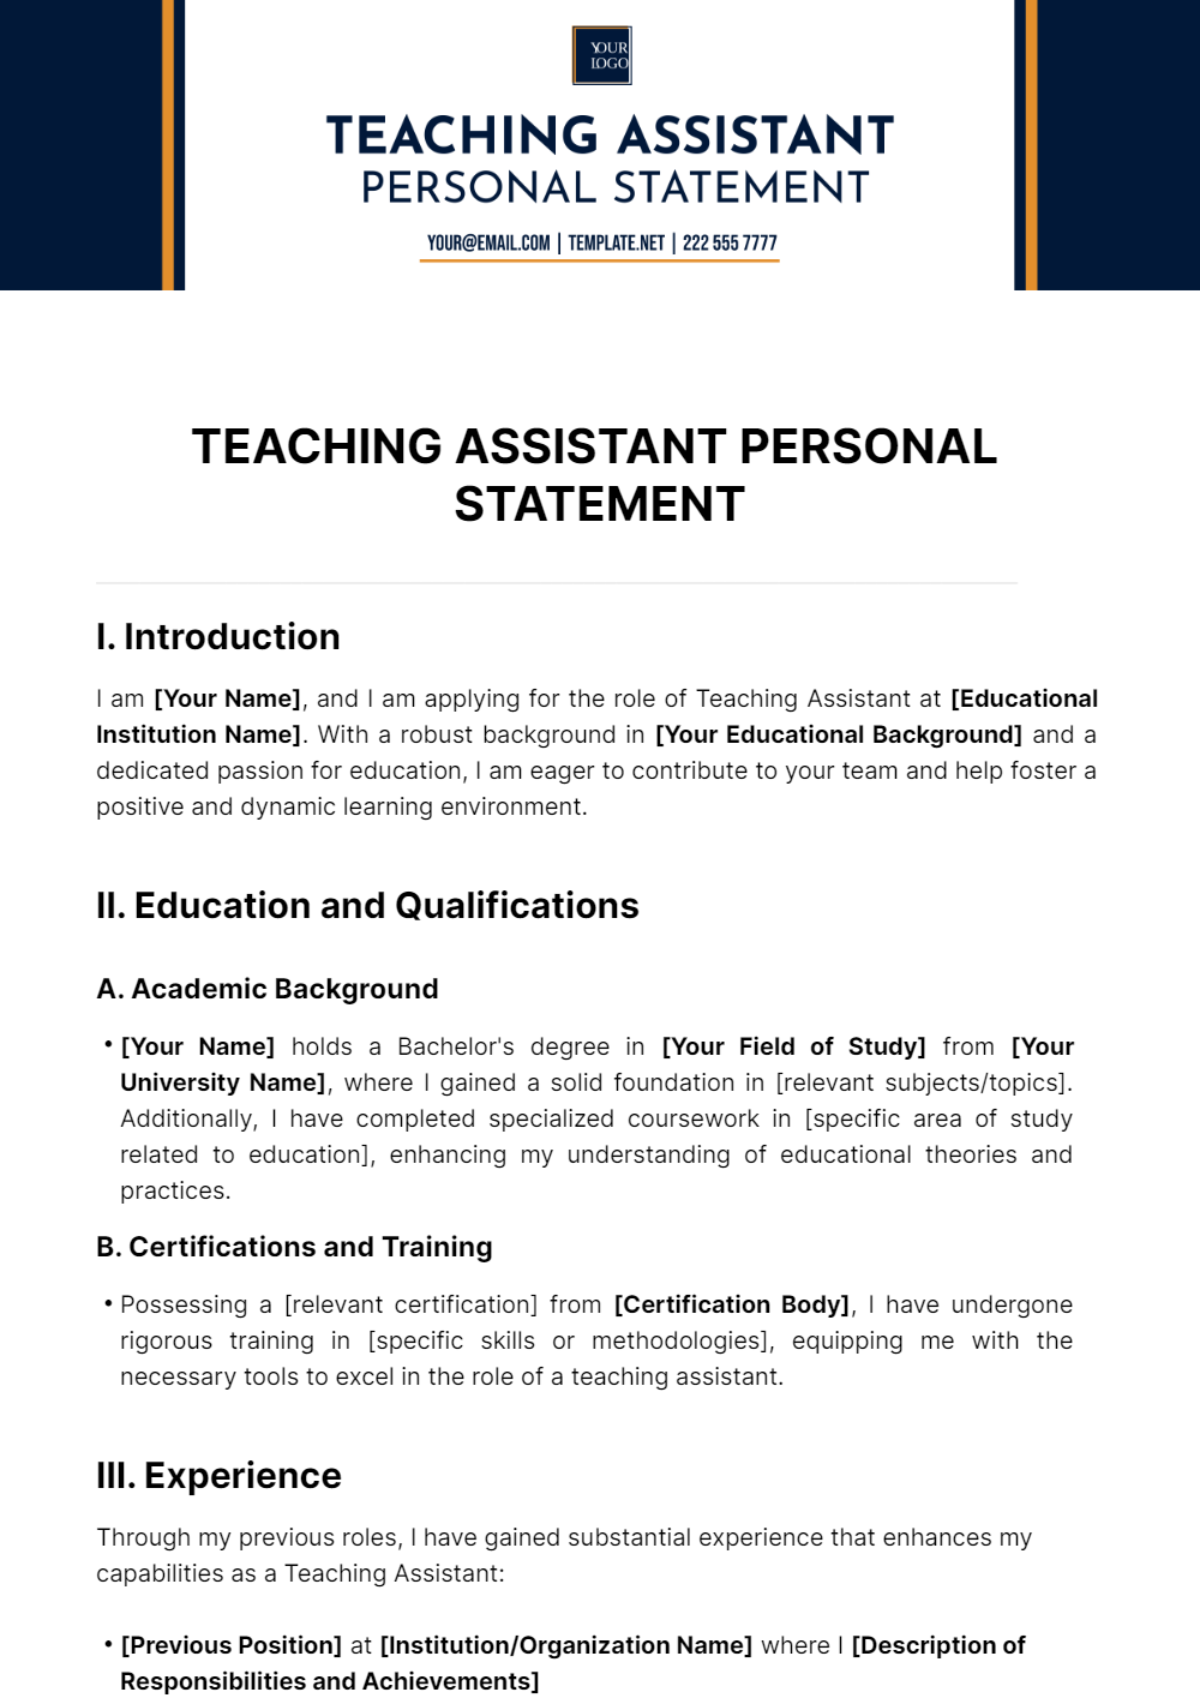 Teaching Assistant Personal Statement Template